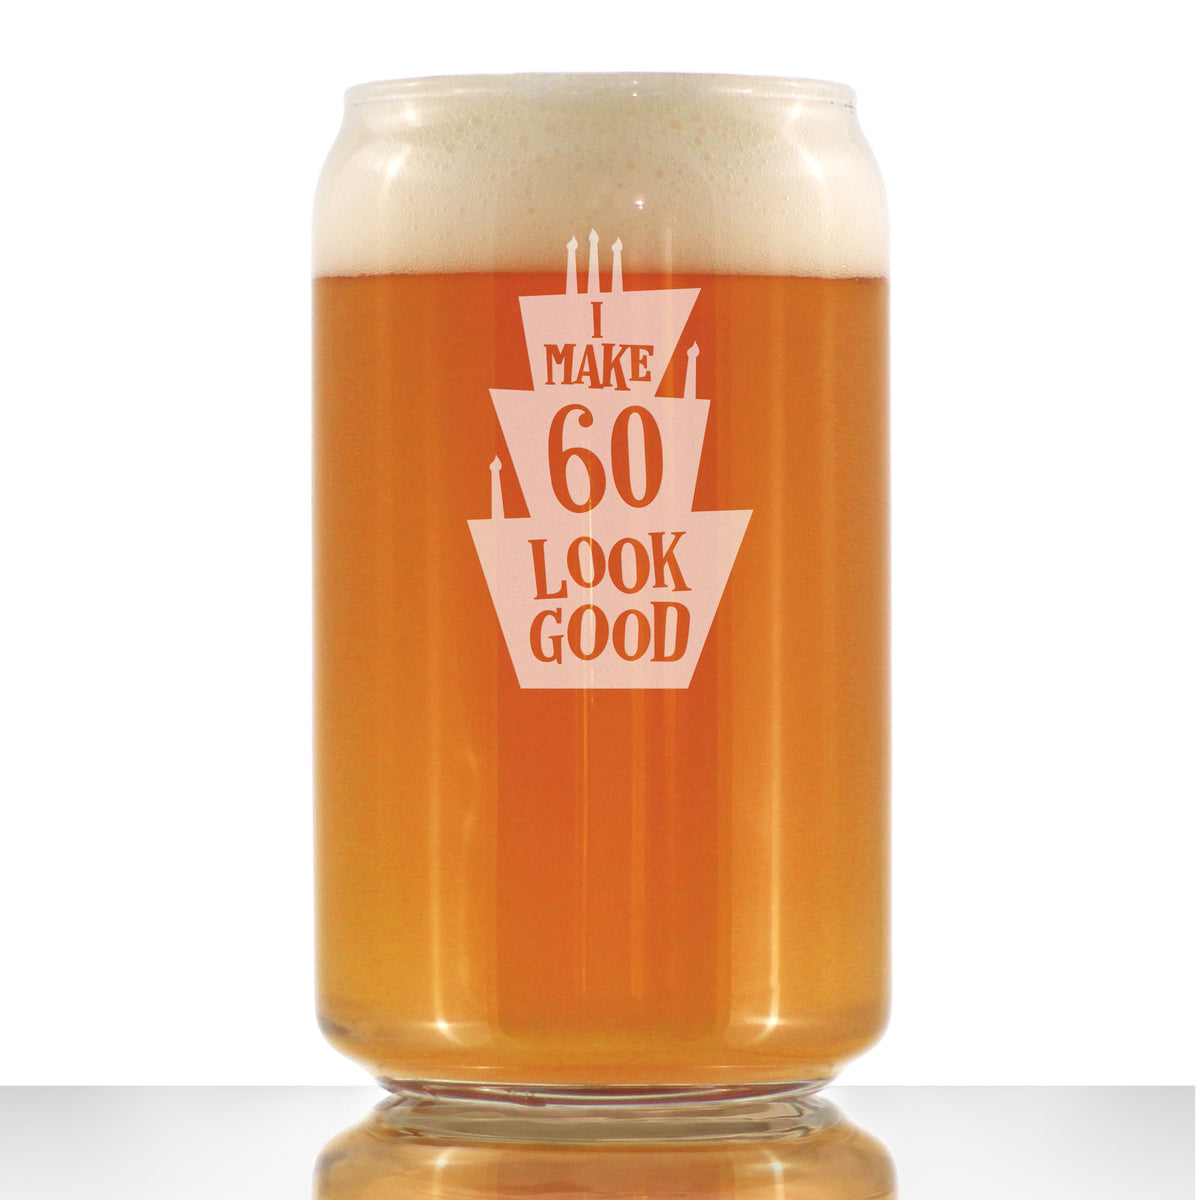 Make 60 Look Good - Funny 16 oz Beer Can Pint Glass - 60th Birthday Gifts for Men or Women Turning 60 - Bday Party Decor